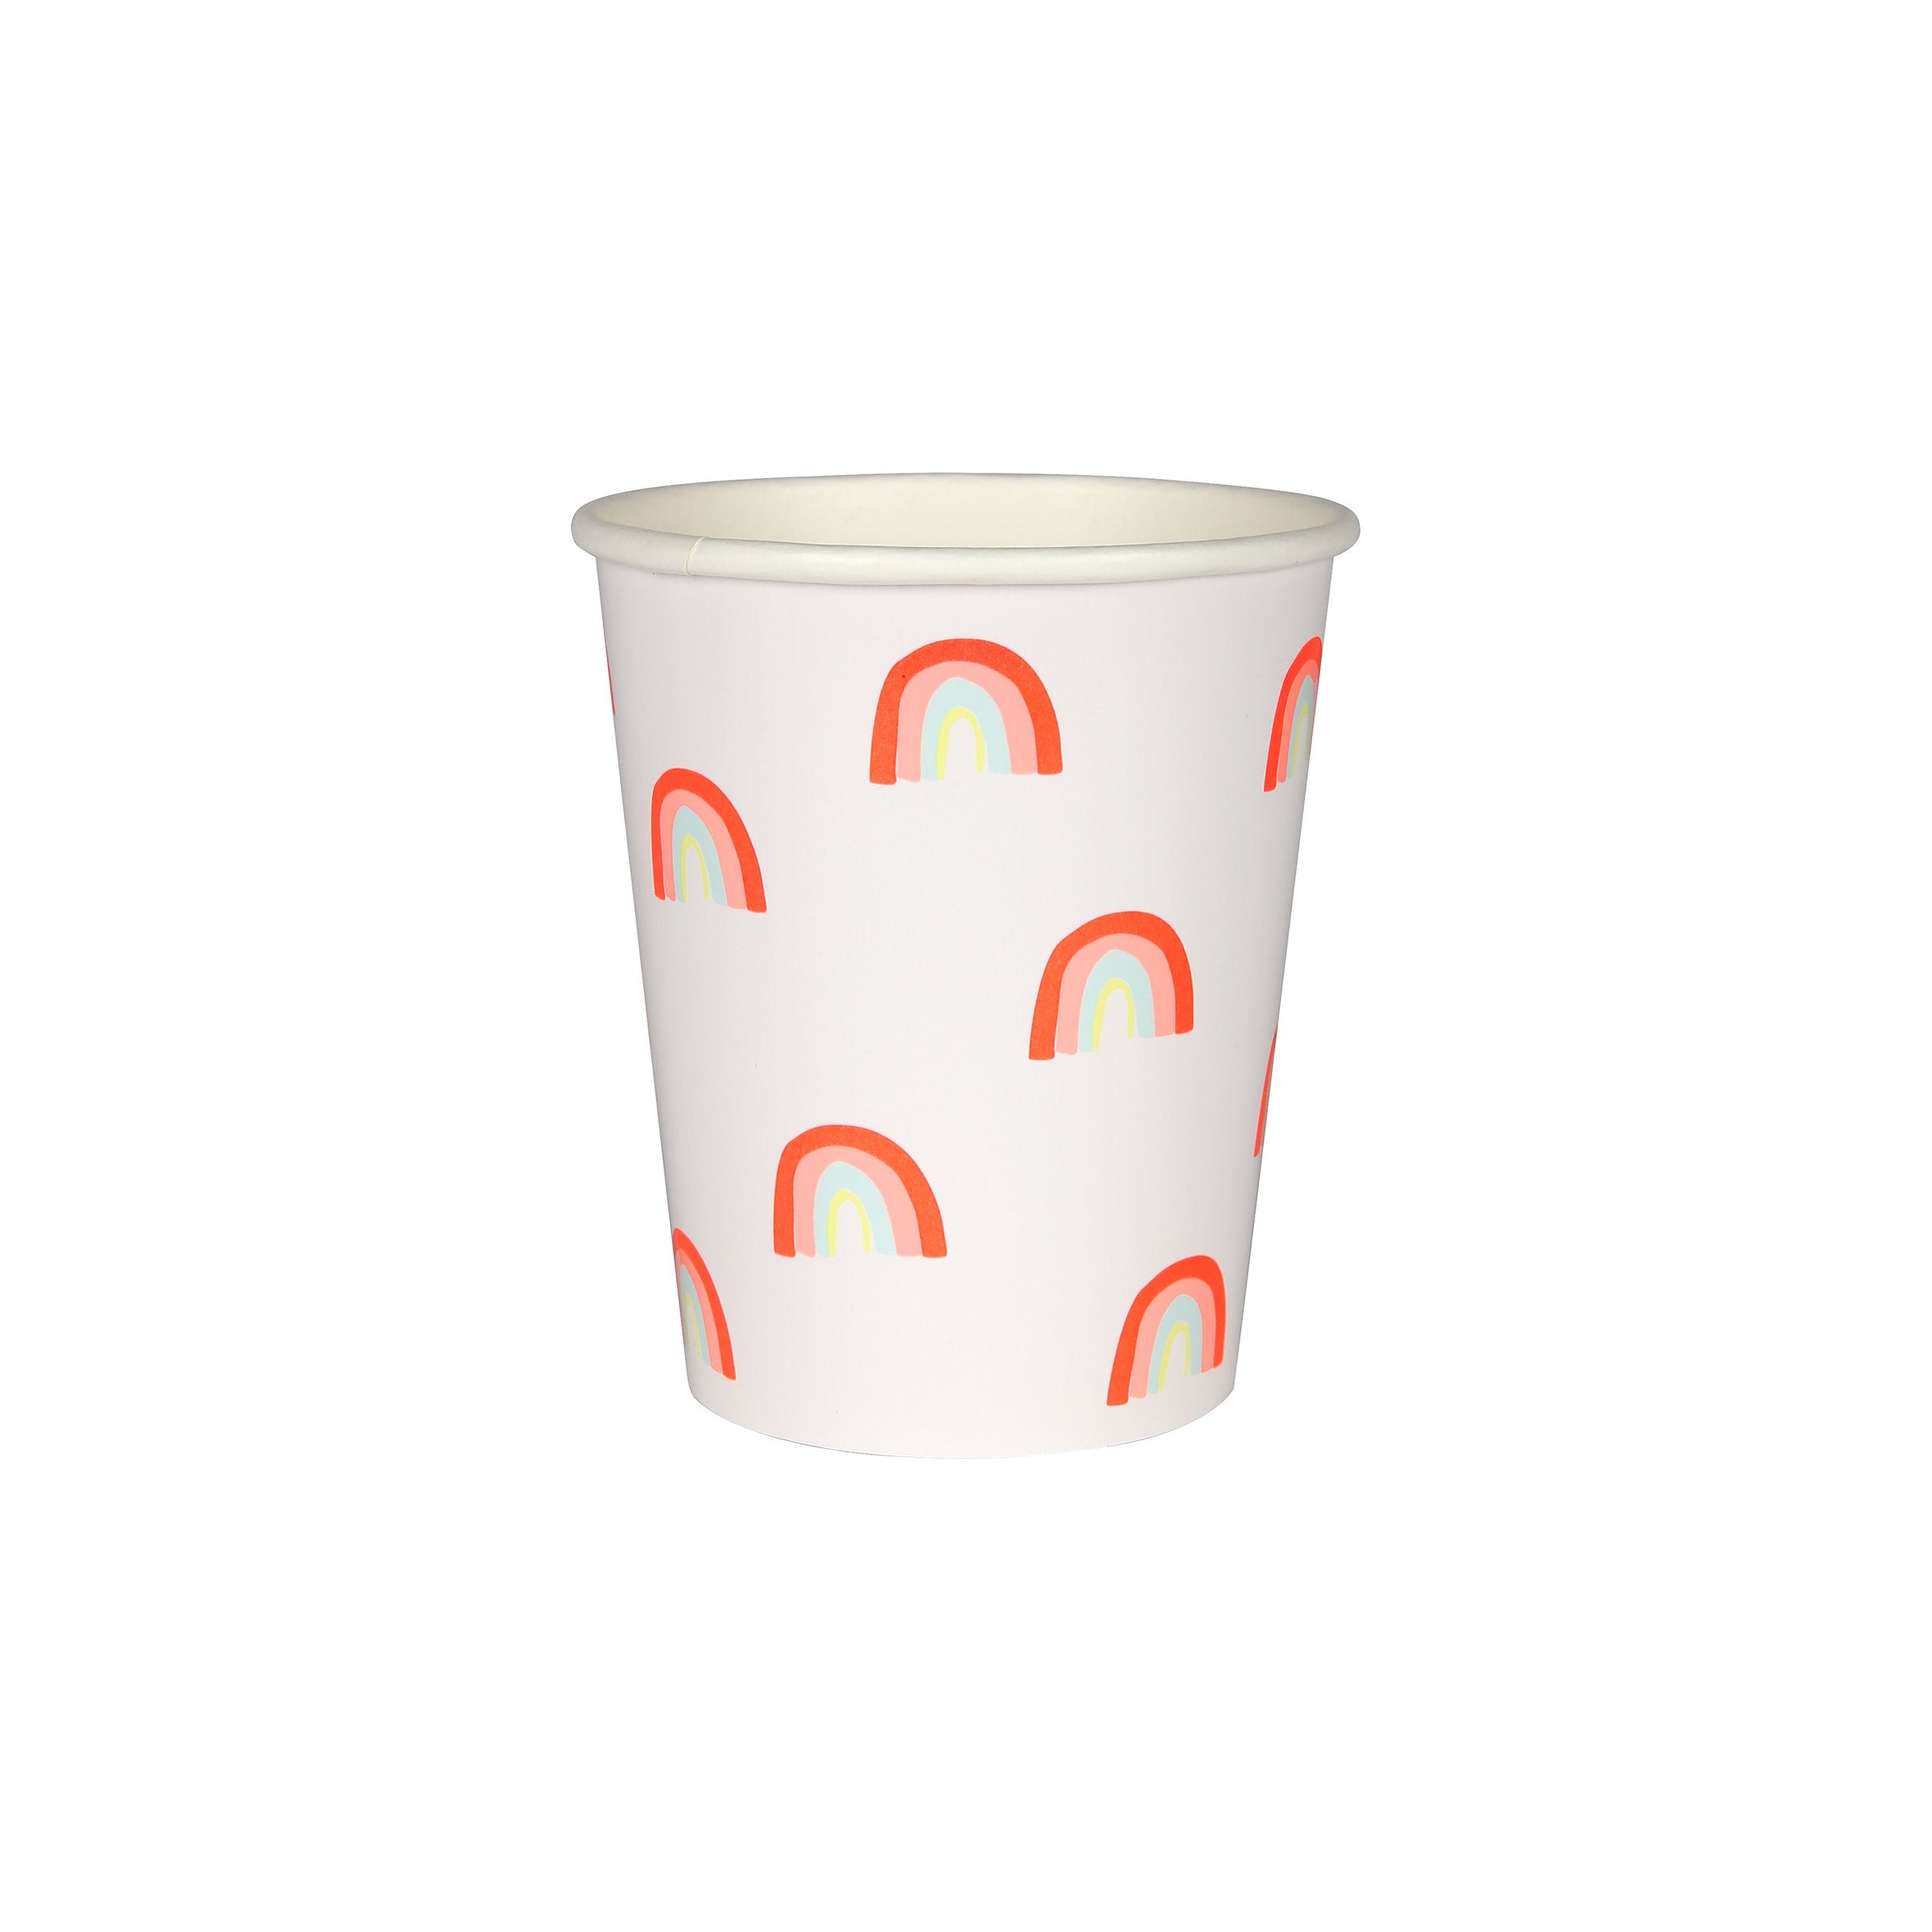 These paper cups, with a mini neon rainbow design, are really bright and cheerful.